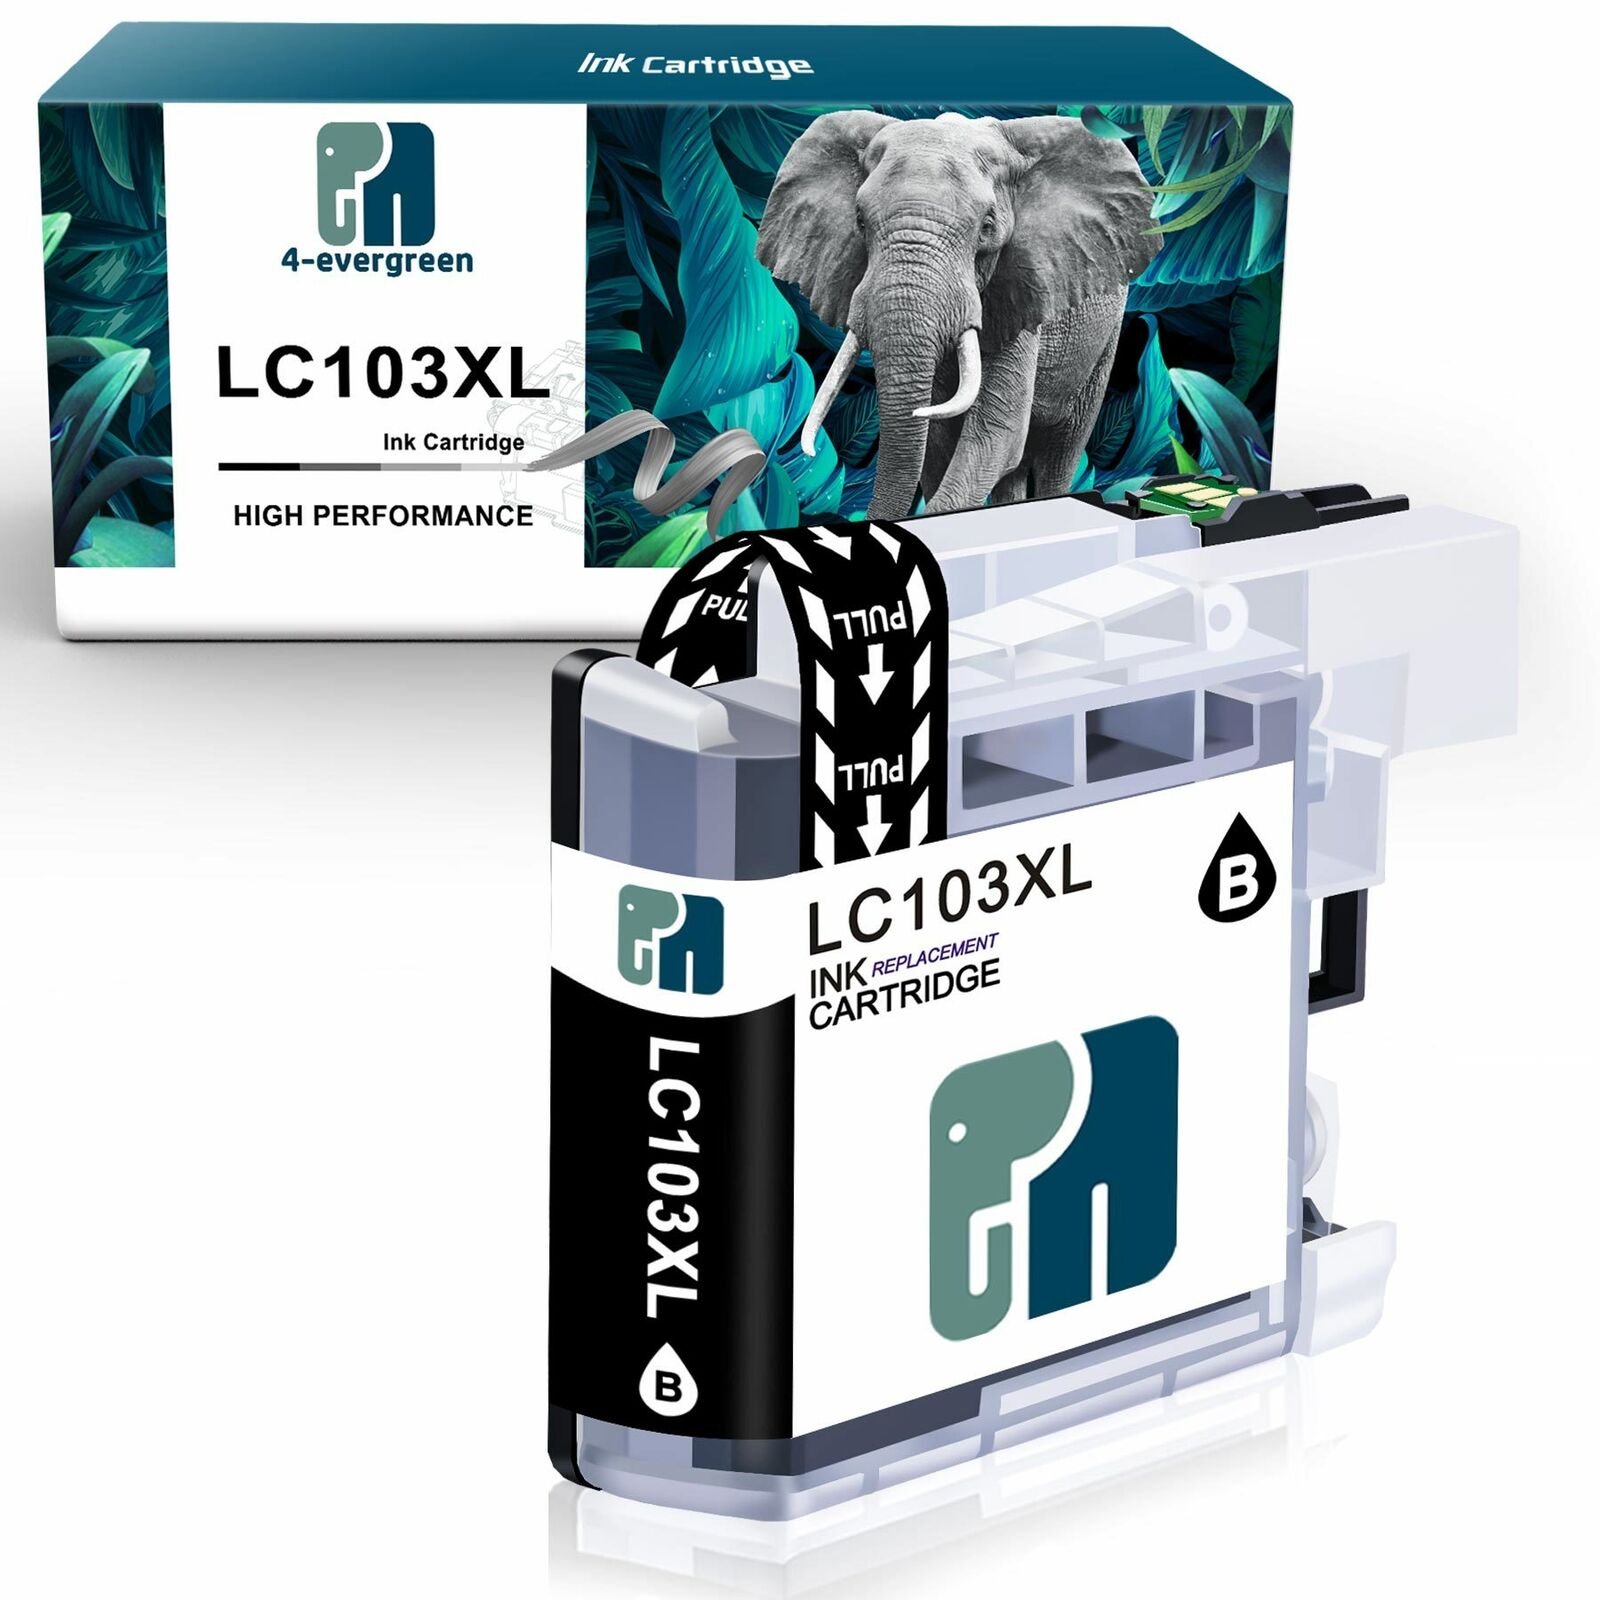 LC103XL Ink Cartridge For Brother LC-103XL MFC-J470DW MFC-J475DW MFC-J870DW